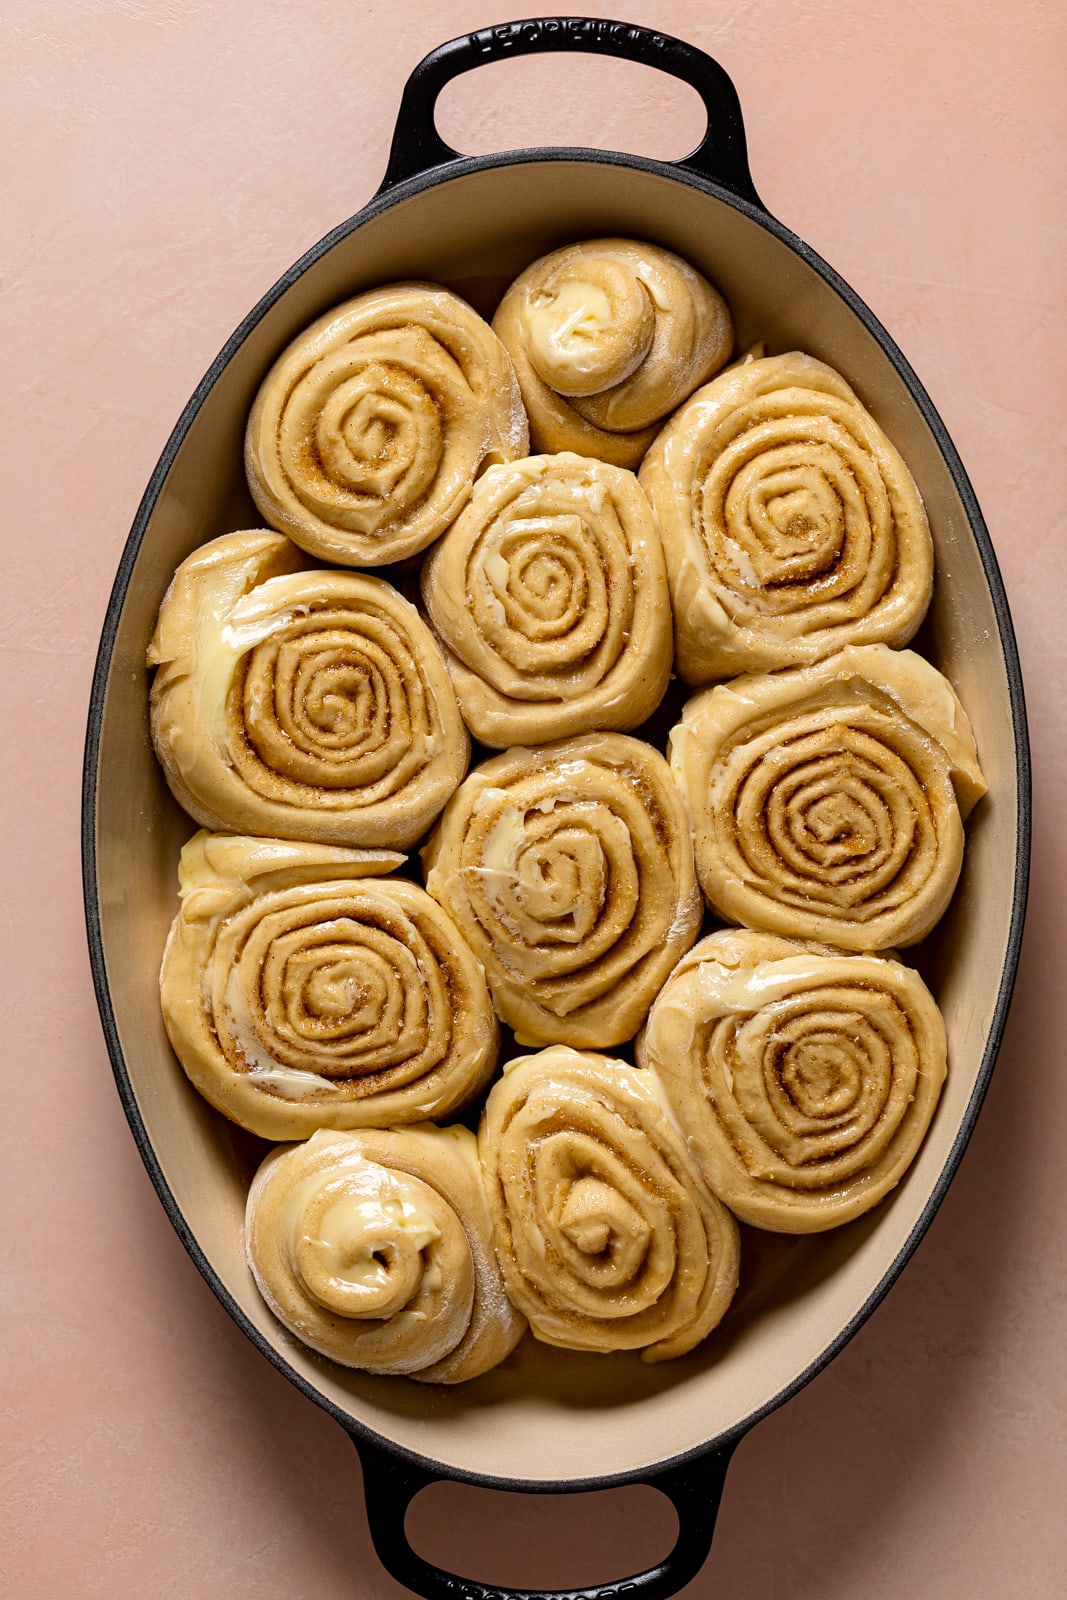 Uncooked Cinnamon Rolls in a baking dish.